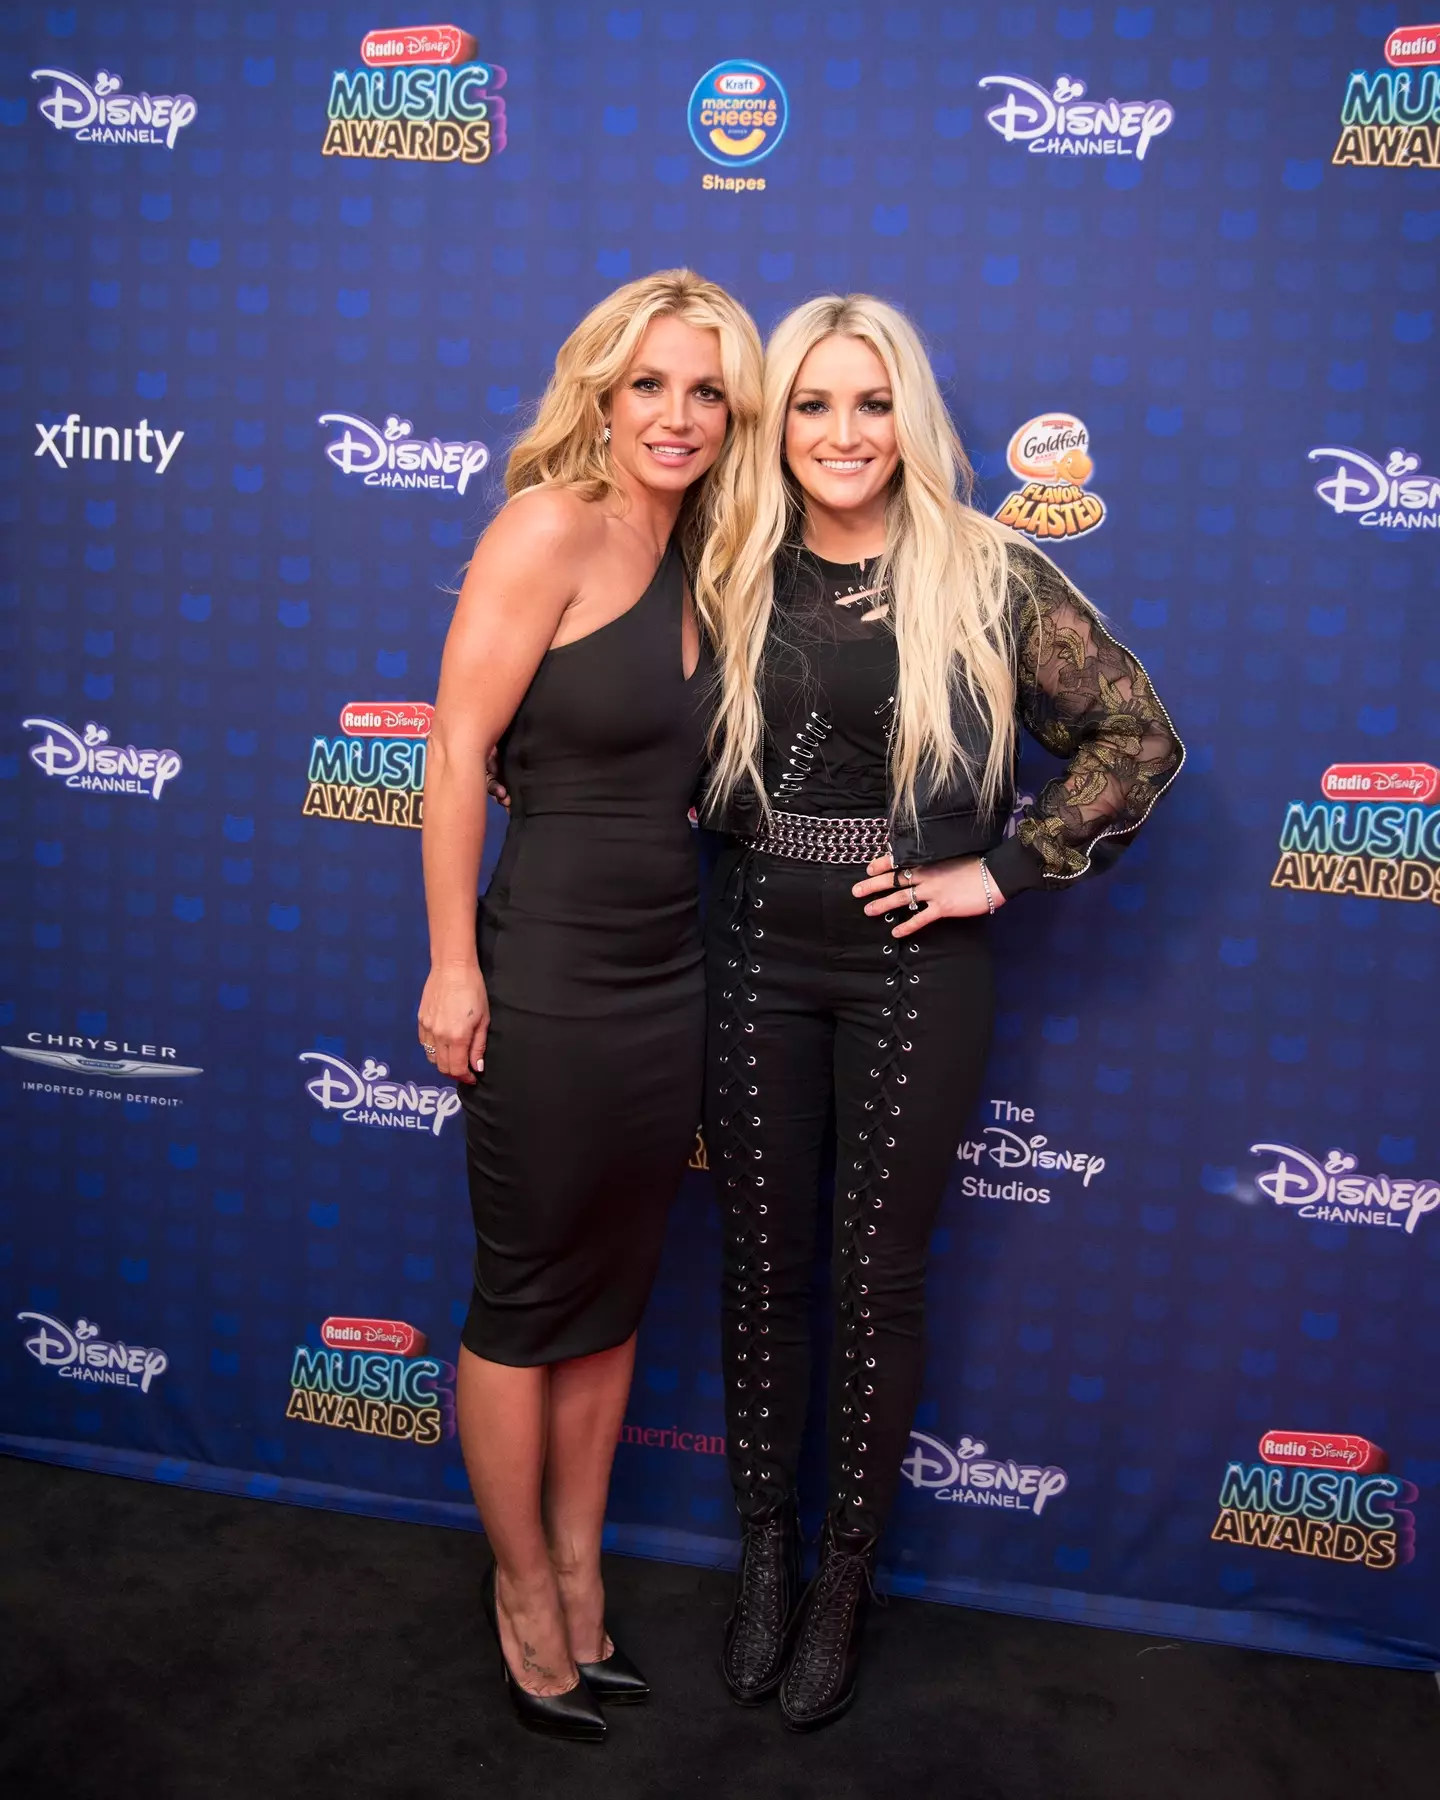 Britney has fired shots at her little sister, Jamie Lynn Spears. (Group LA/Disney Channel via Getty Images)